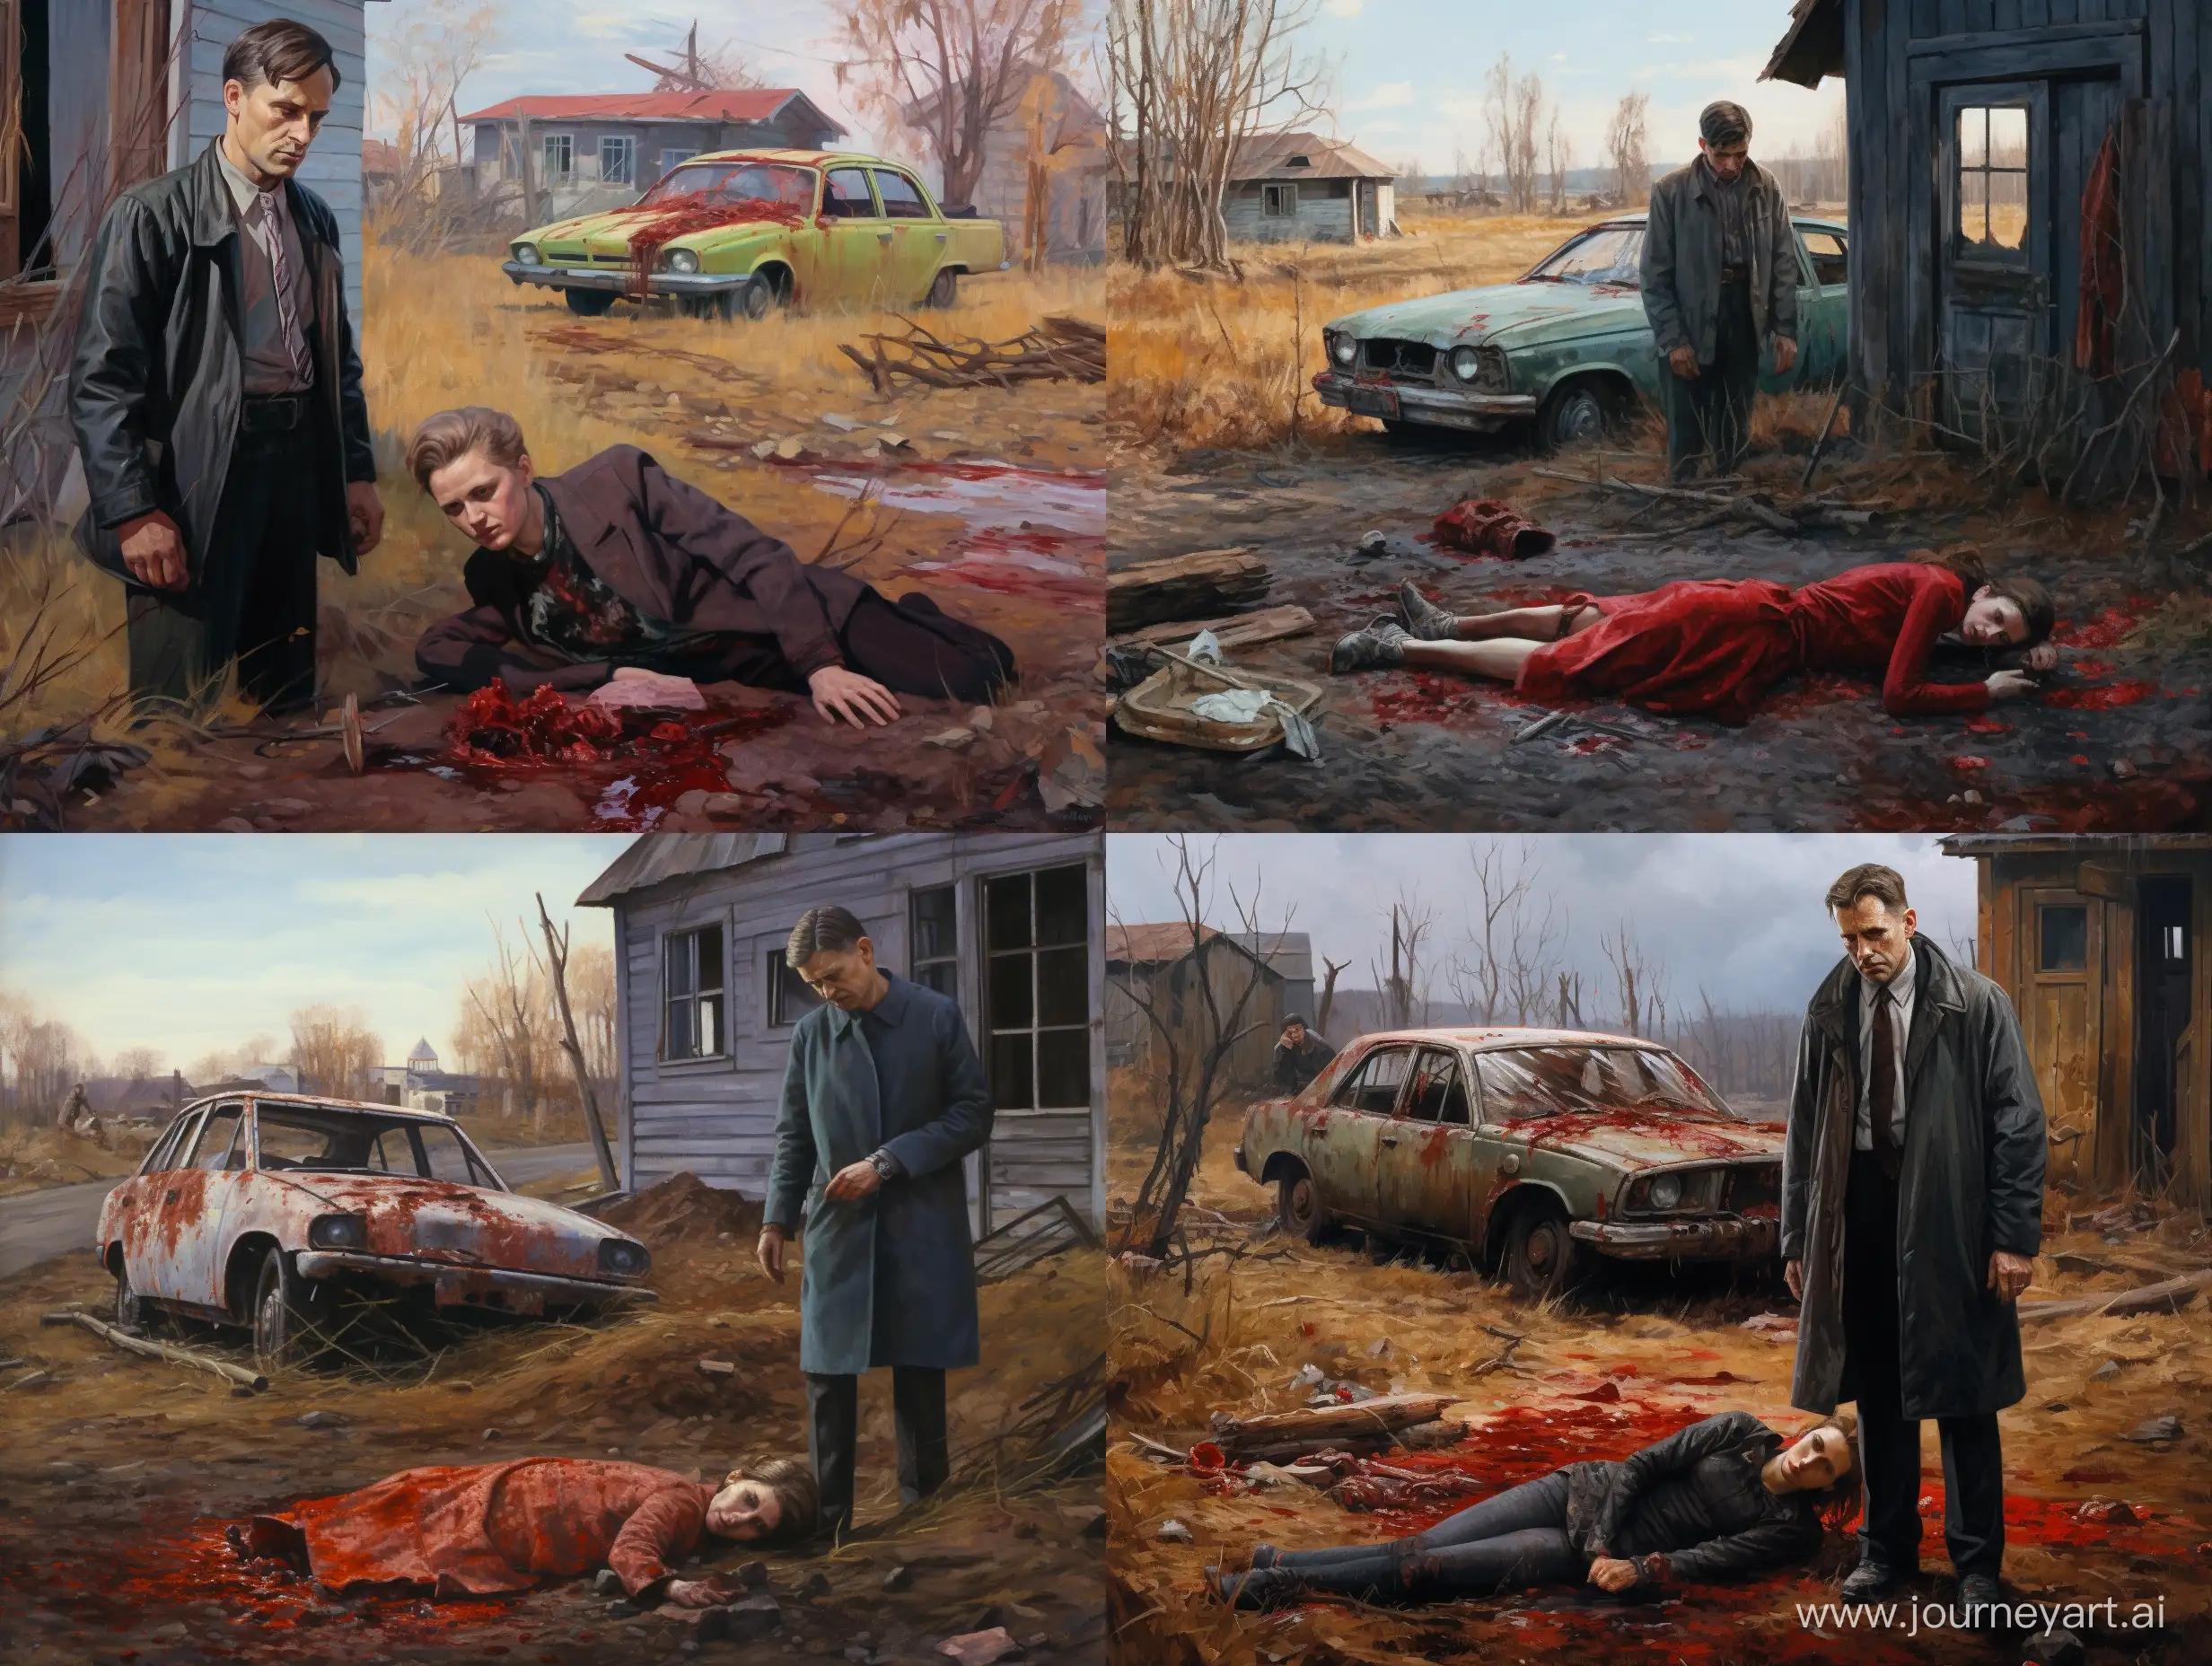 Tragic-Scene-in-a-PostSoviet-Village-Mourning-Woman-Beside-a-Bloodied-Corpse-near-Ruined-Car